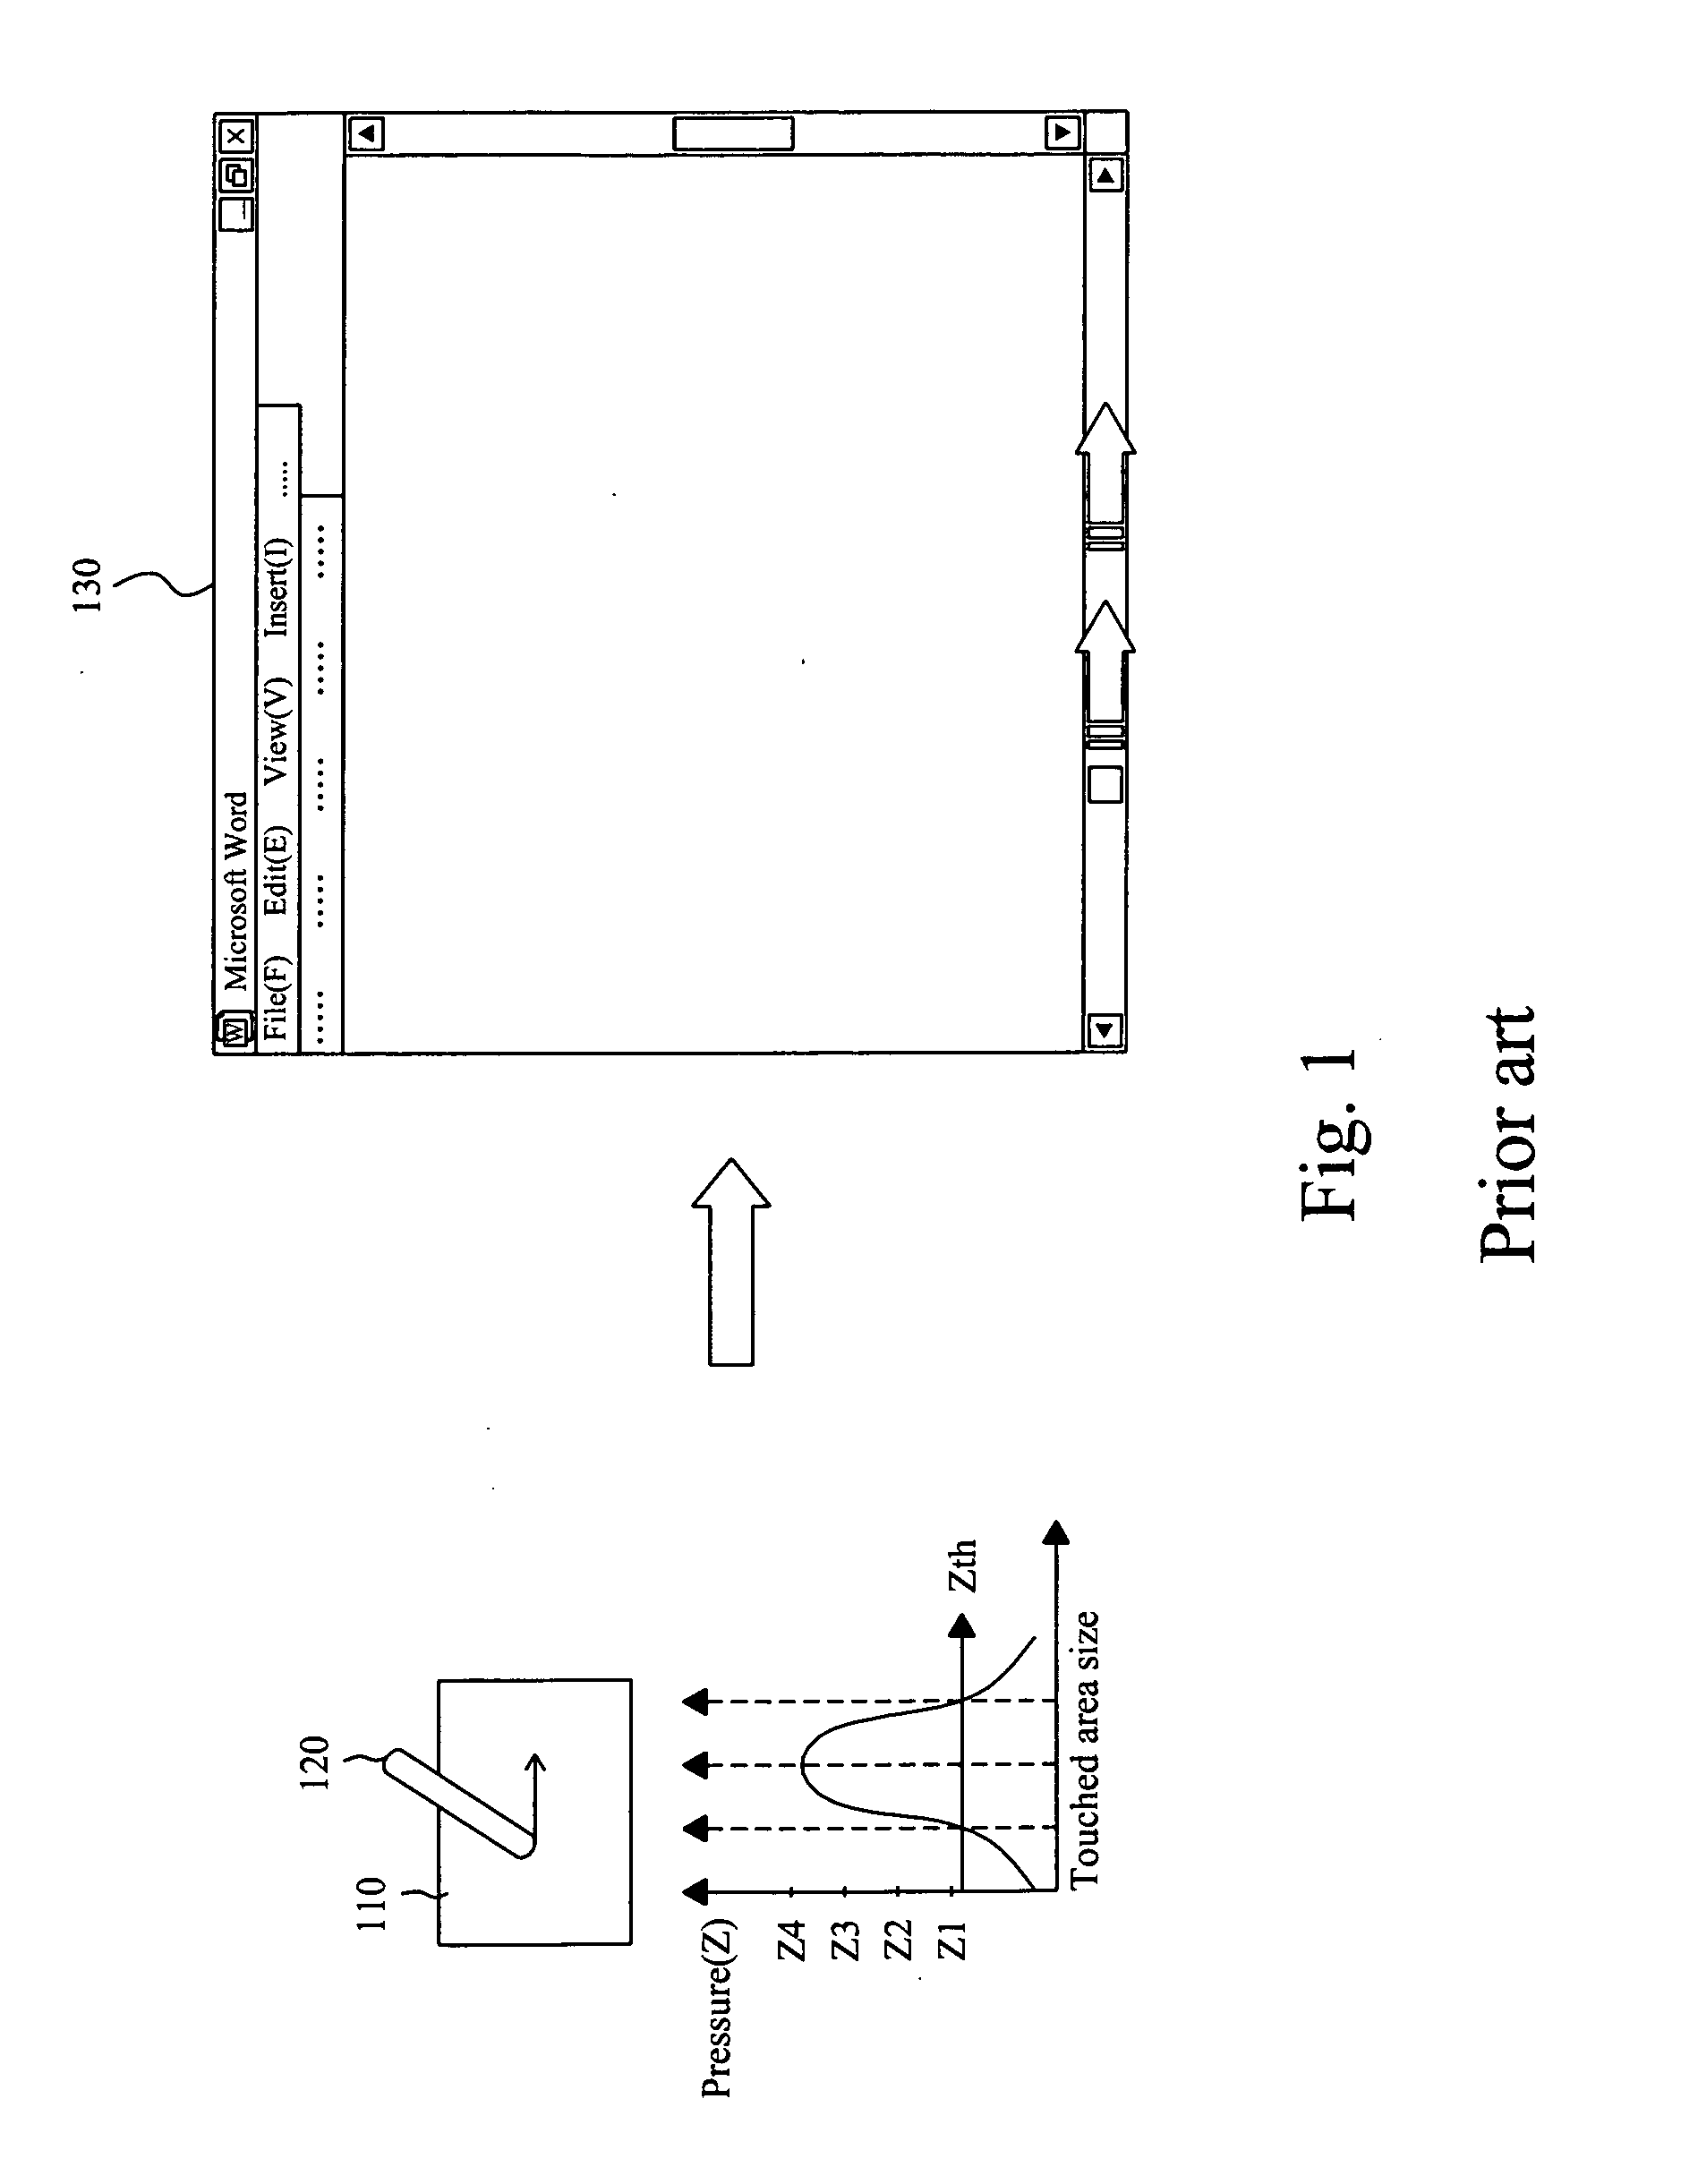 Method for window movement control on a touchpad having a touch-sense defined speed